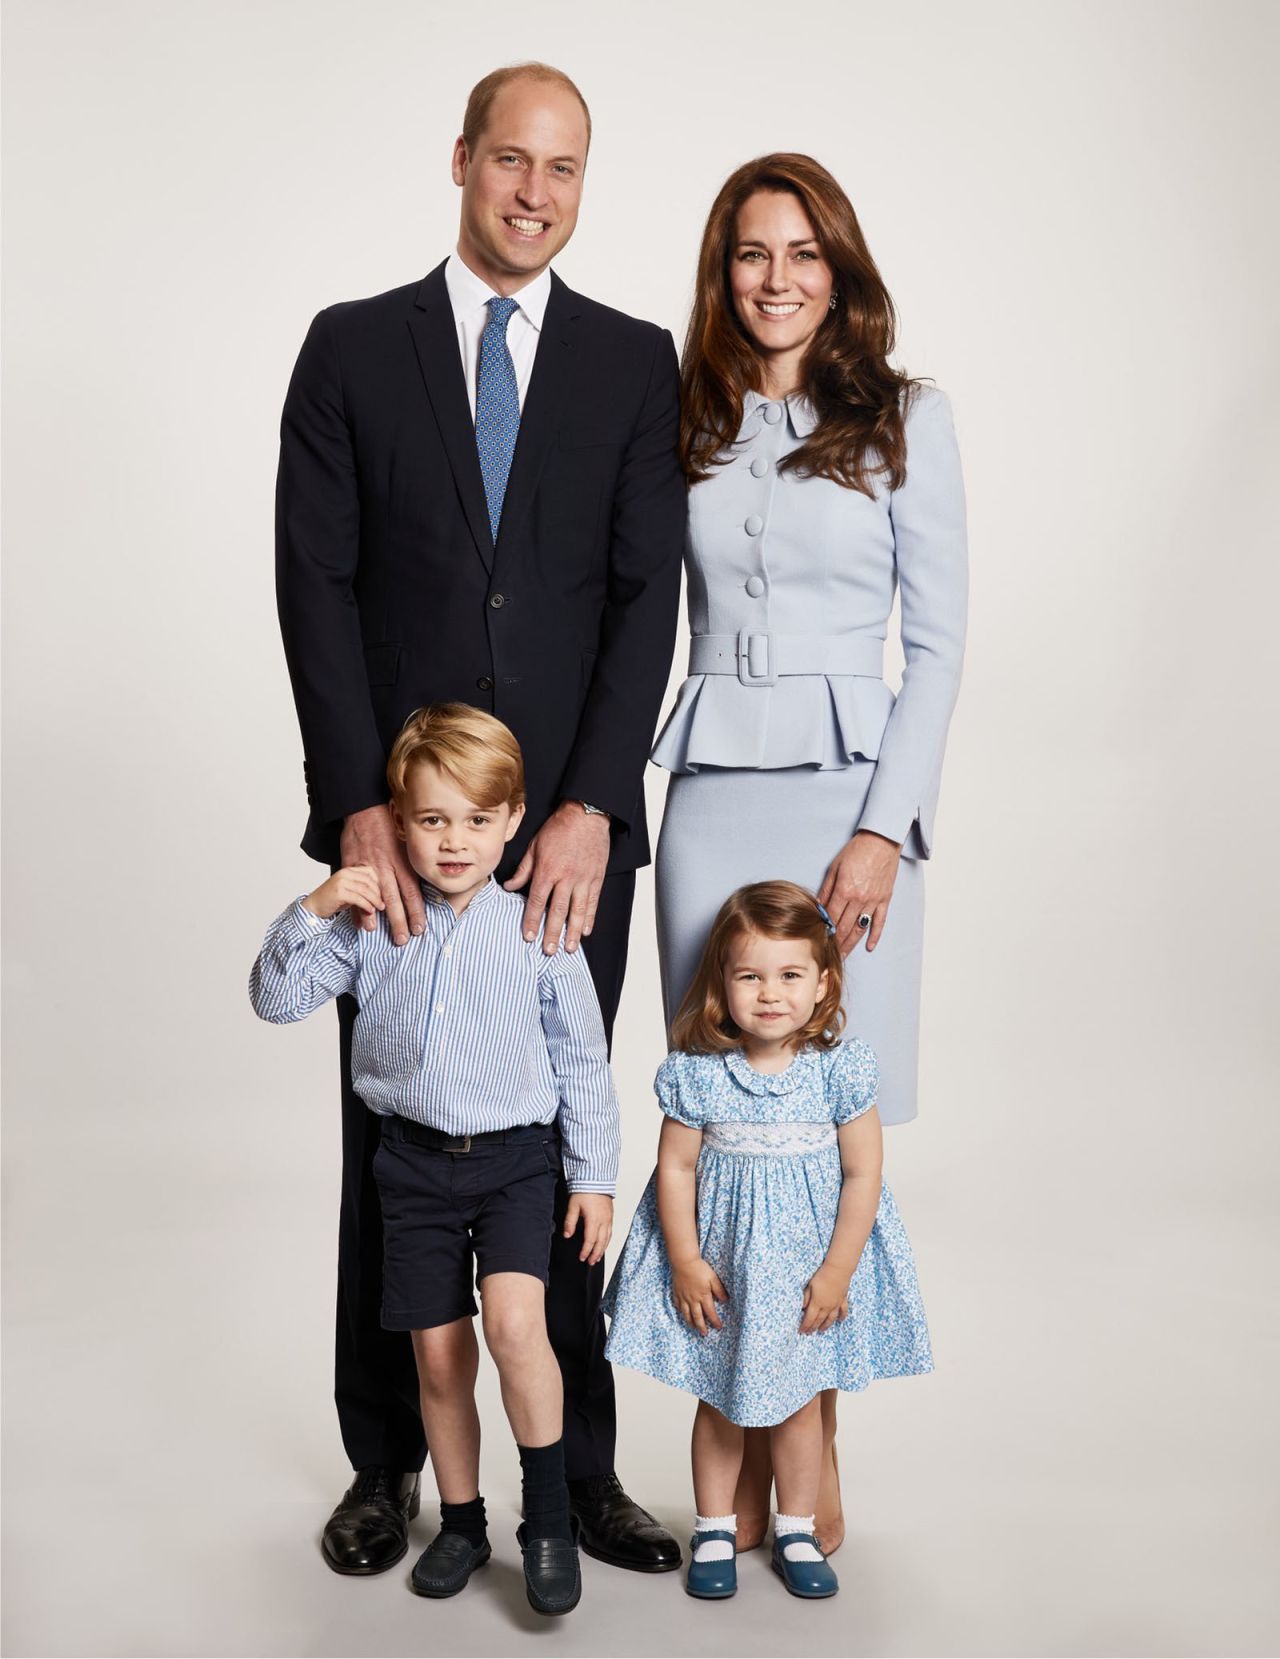 The image, used for the Duke and Duchess' 2017 Christmas card, shows the couple with their children, Prince George and Princess Charlotte.